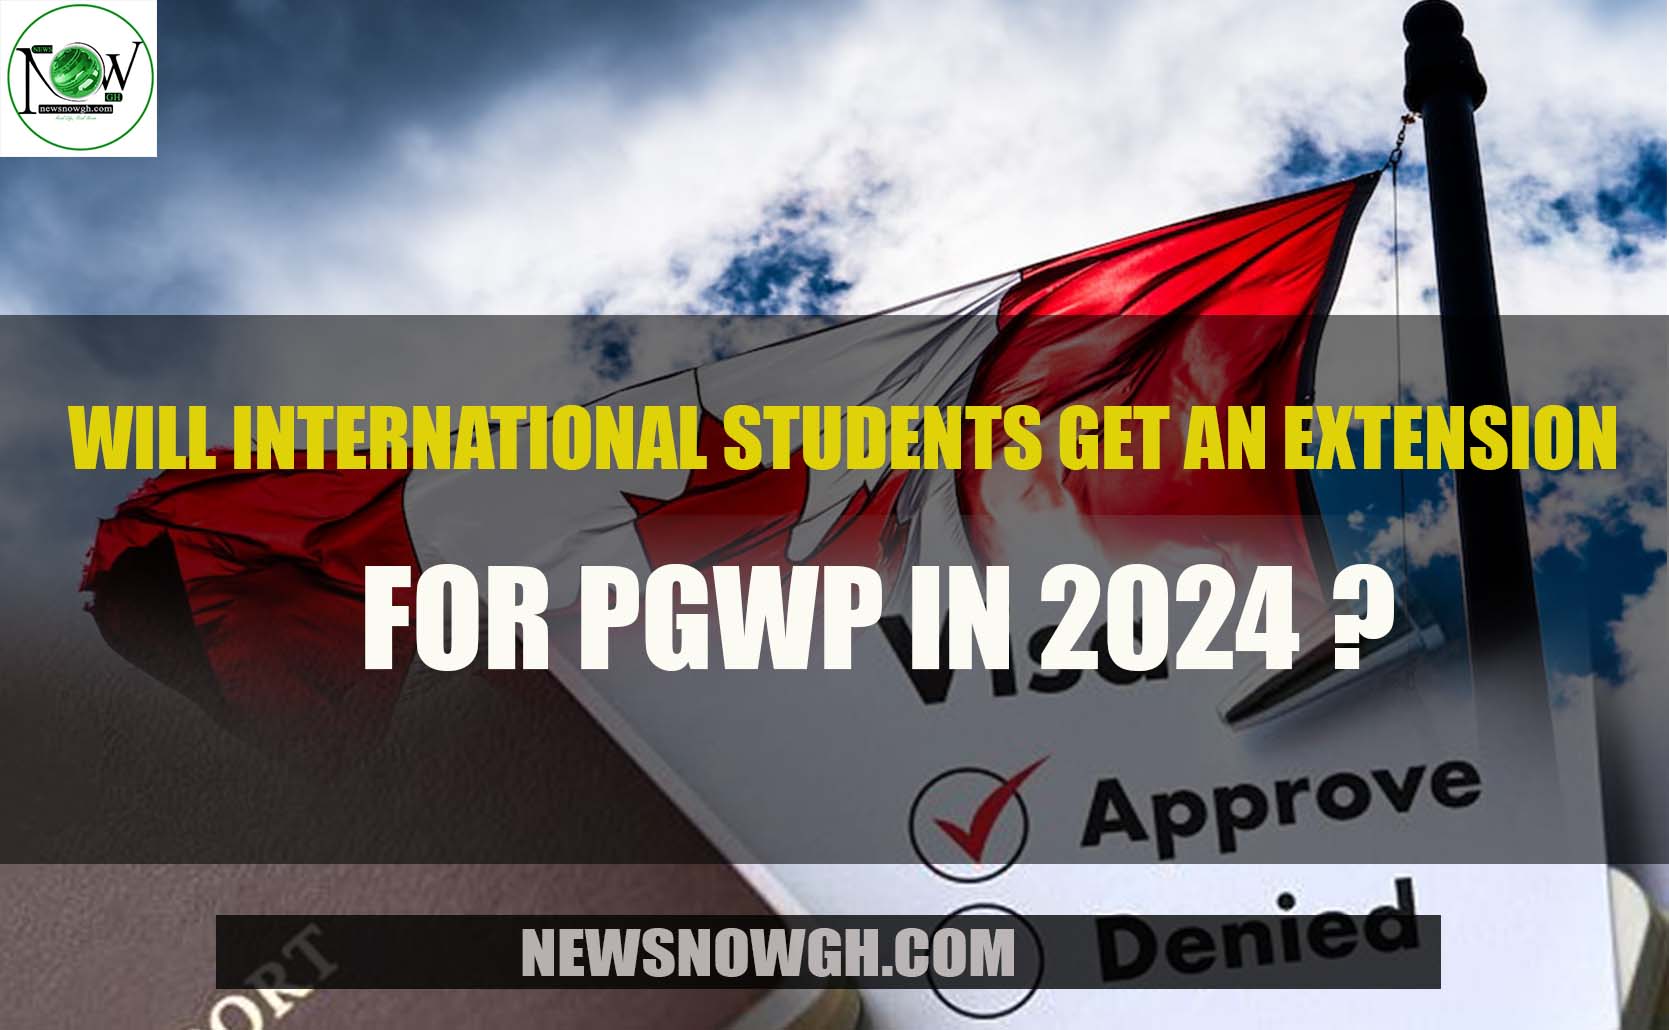 Will International Students Get an Extension for PGWP in 2024?